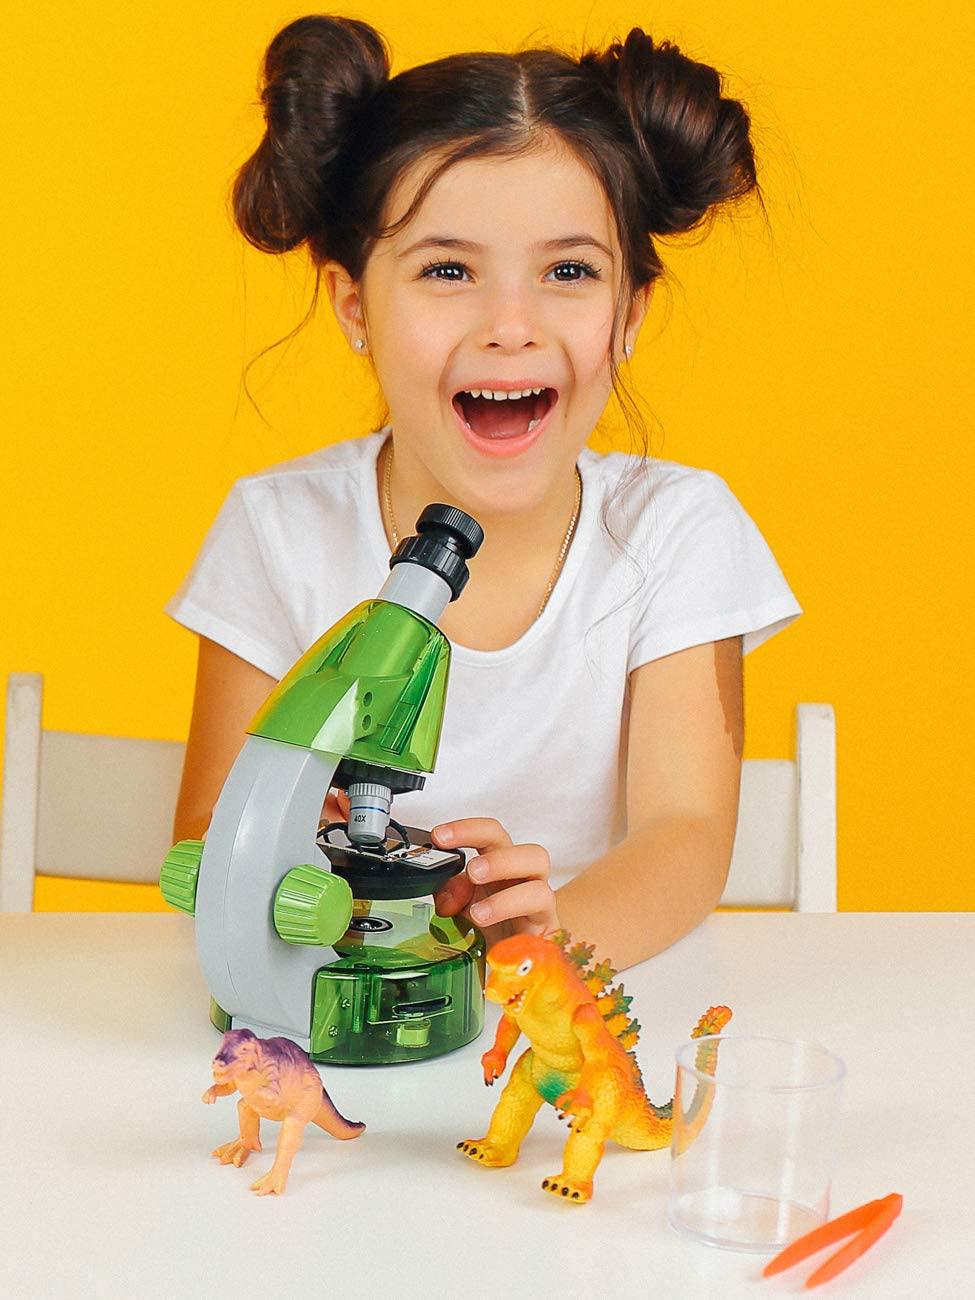 Levenhuk, Levenhuk LabZZ M101 Lime Microscope for Kids with Experiment Kit - Choose Your Favorite Color